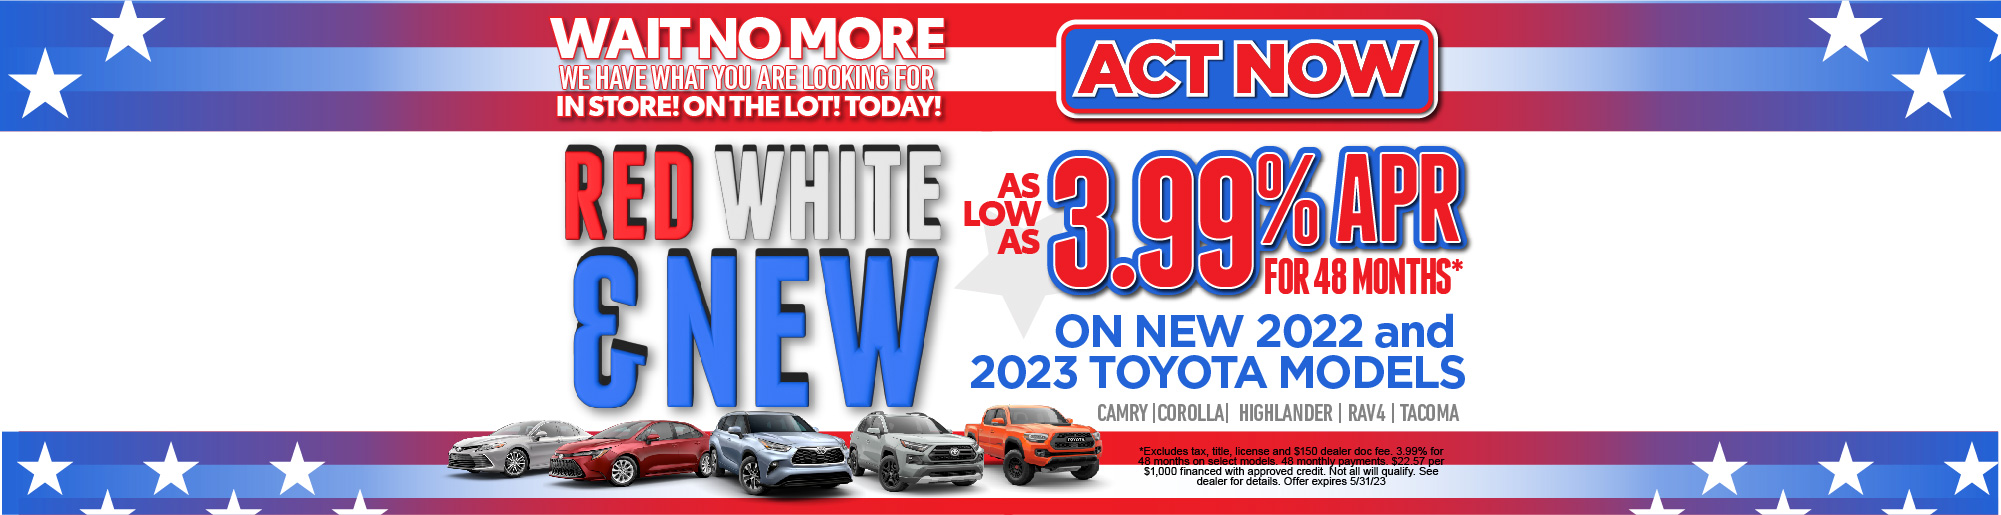 3.49% APR for 60 Months on 10 New 2022 Toyota Models.